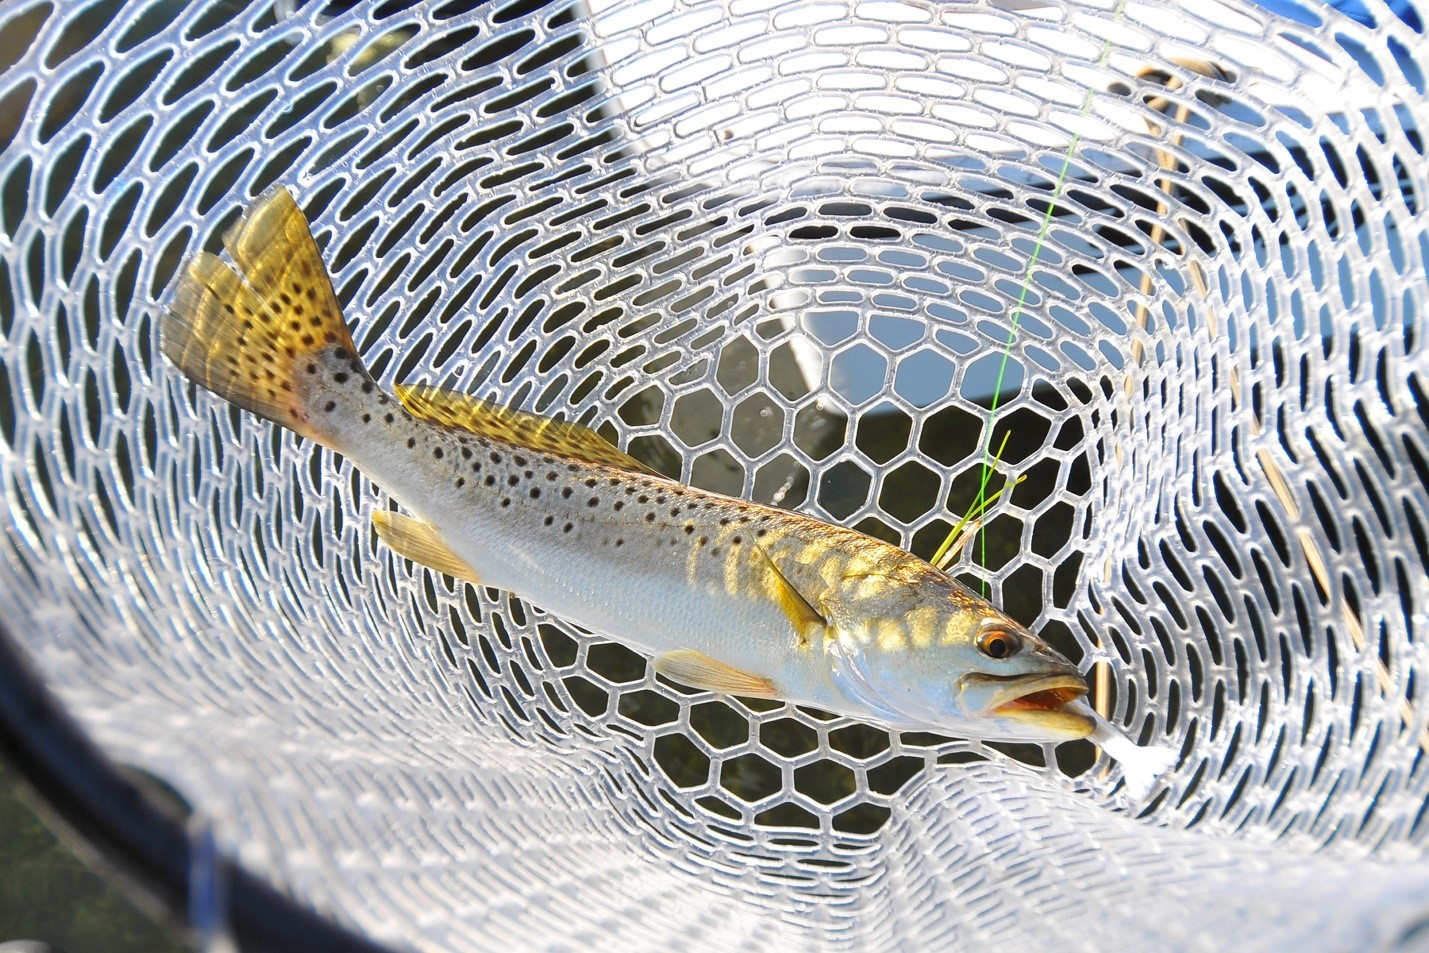 seatrout in net